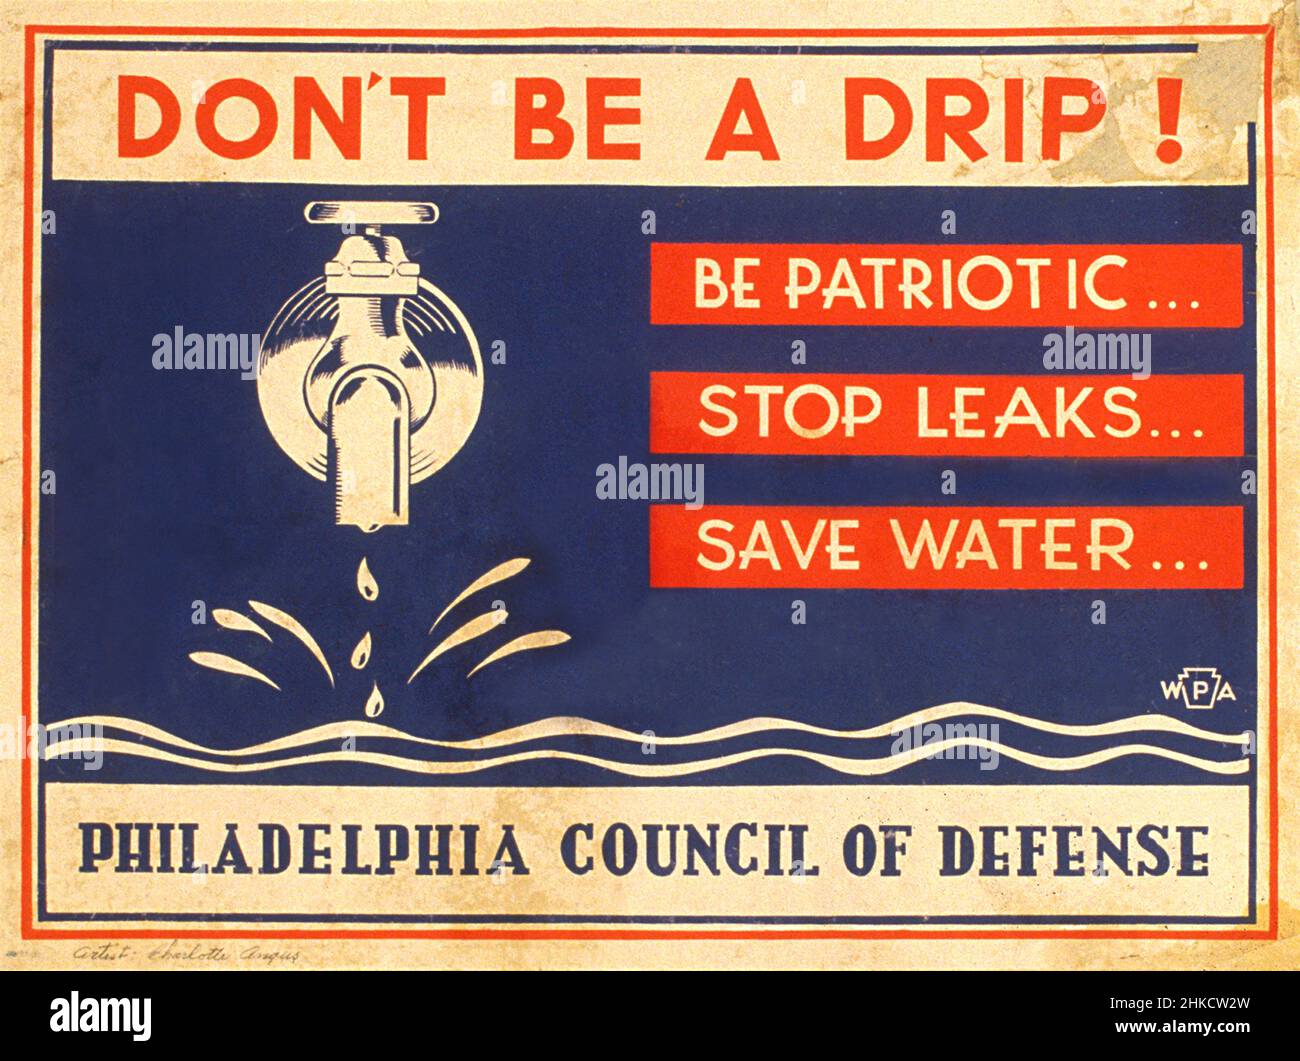 Wasserschutz-Poster: „Don't be a Drip! Be Patriotic, Stop Leaks, Save Water', Works Project Administration, Philadelphia Council of Defense, Charlotte Angus, Works Project Administration, 1940-1945 Stockfoto